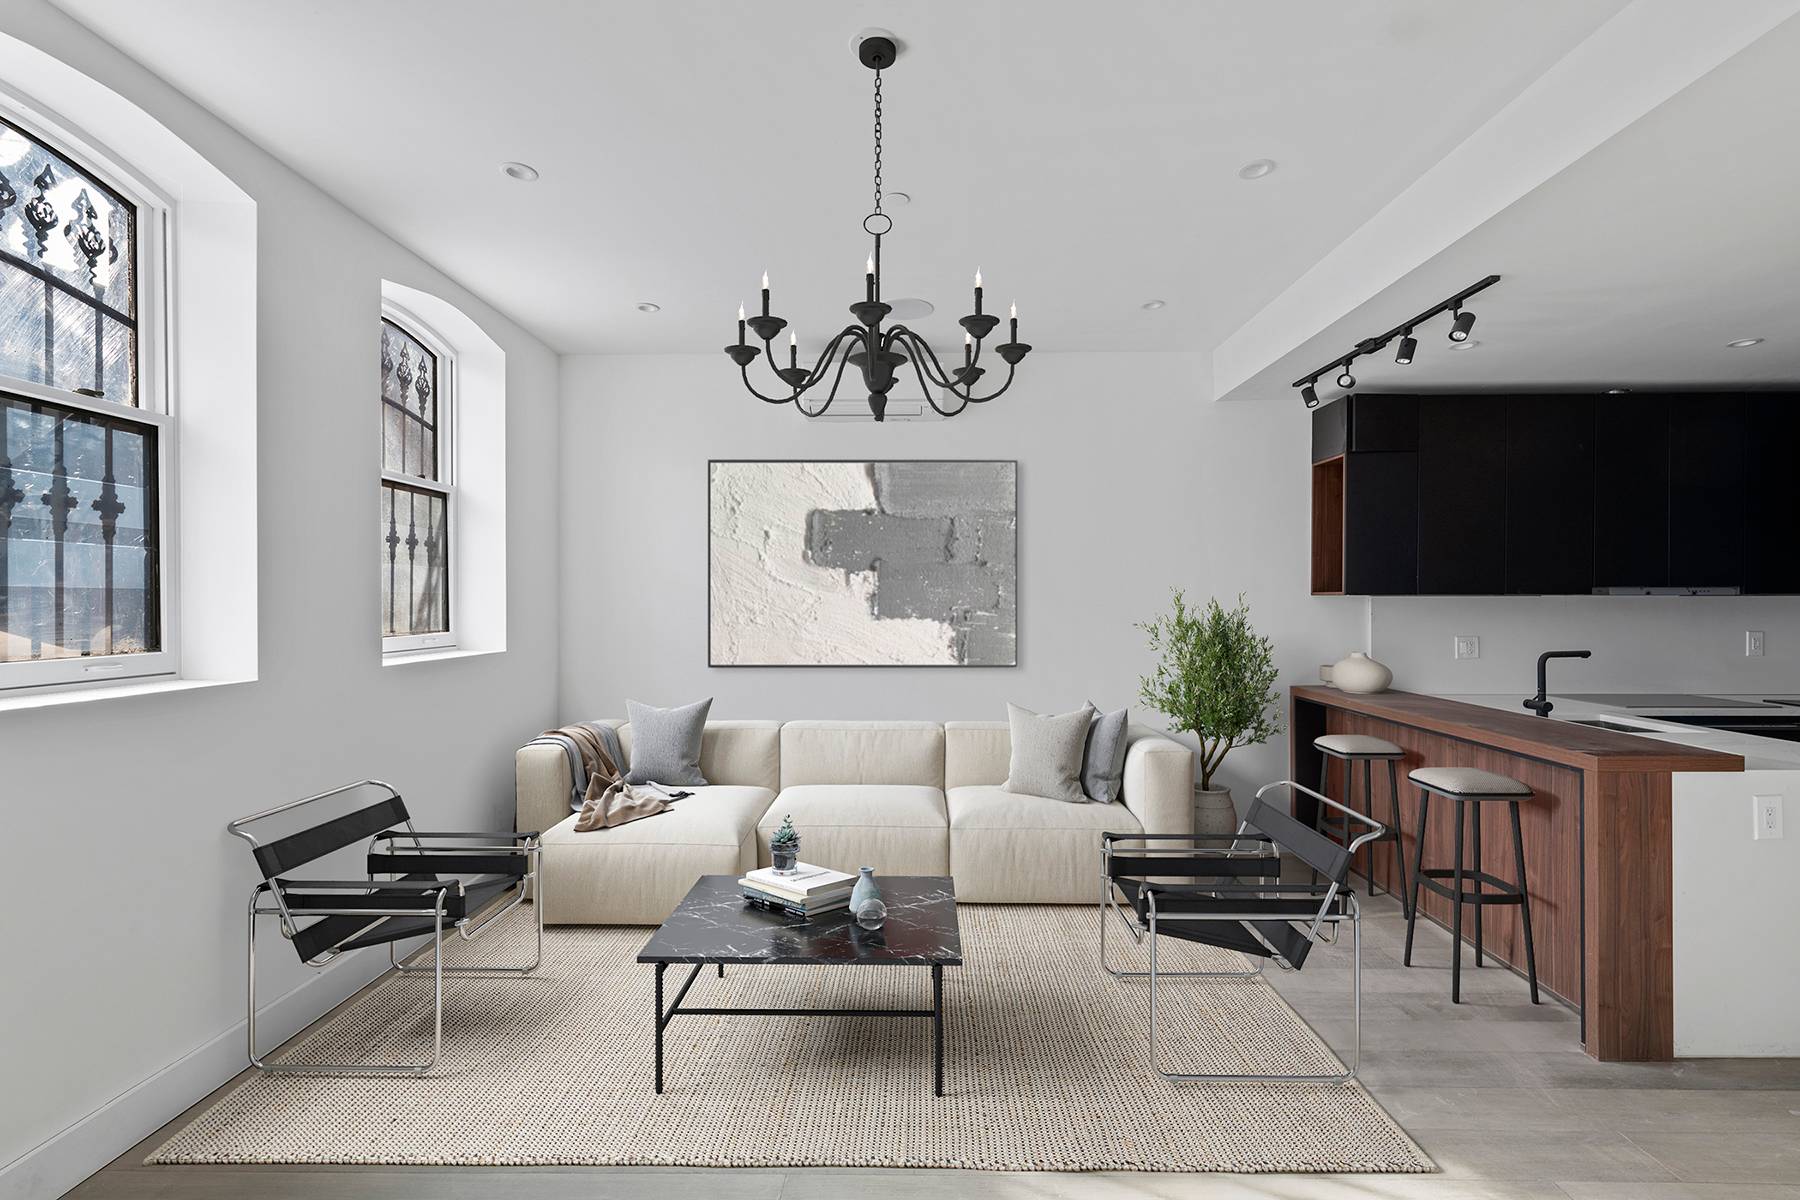 A charming, high end new development awaits you in Stuyvesant Heights.